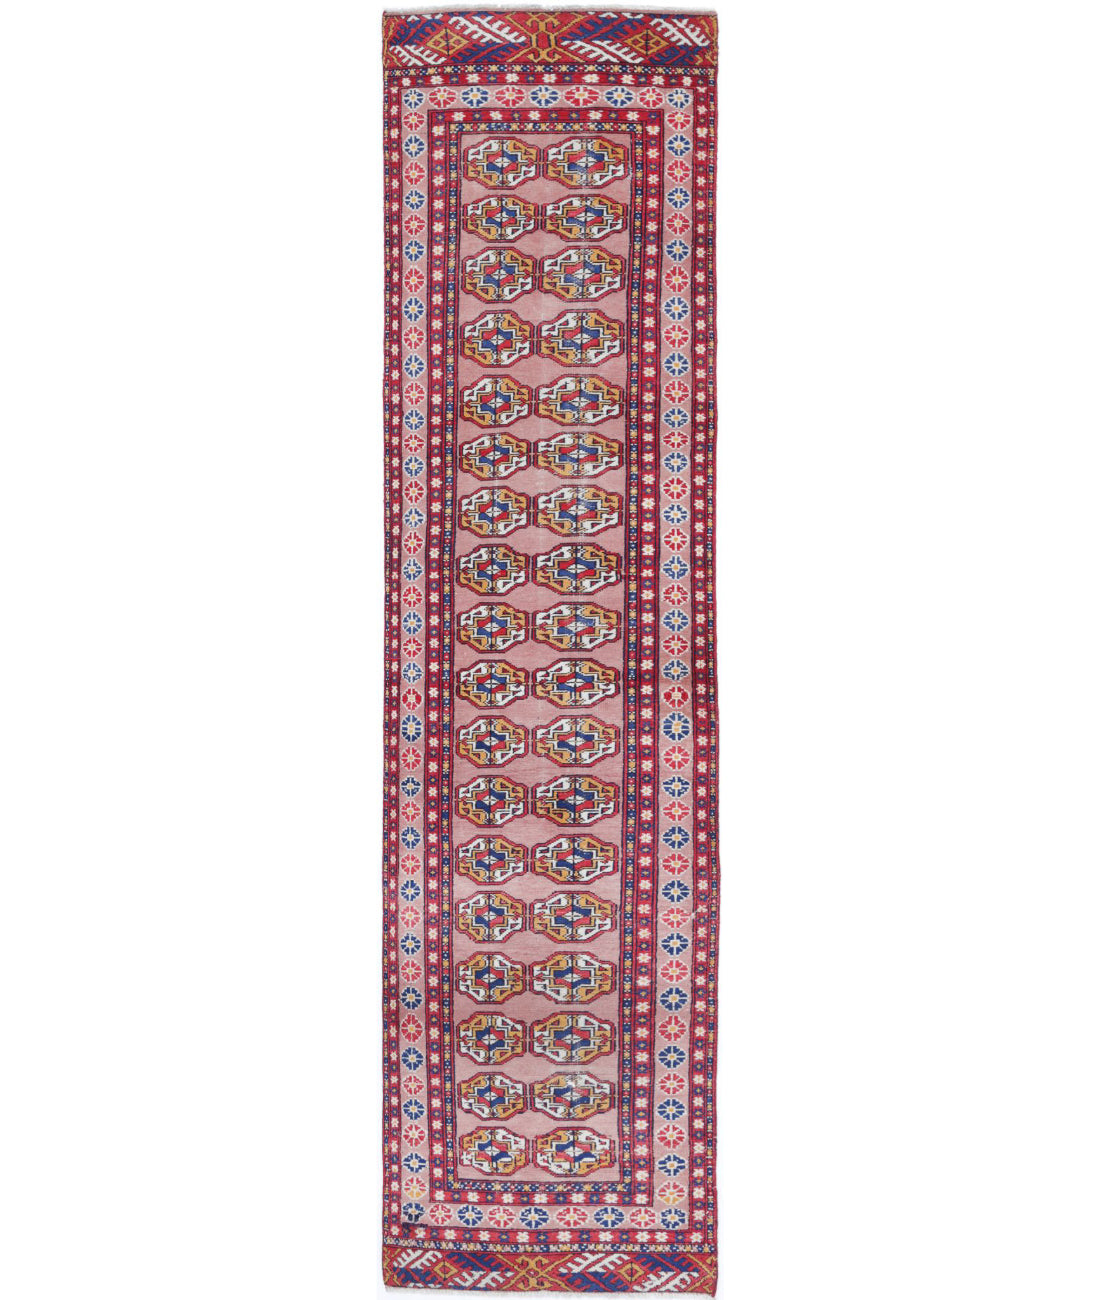 Hand Knotted Tribal Bokhara Wool Rug - 2'4'' x 9'11'' 2'4'' x 9'11'' (70 X 298) / Peach / Red